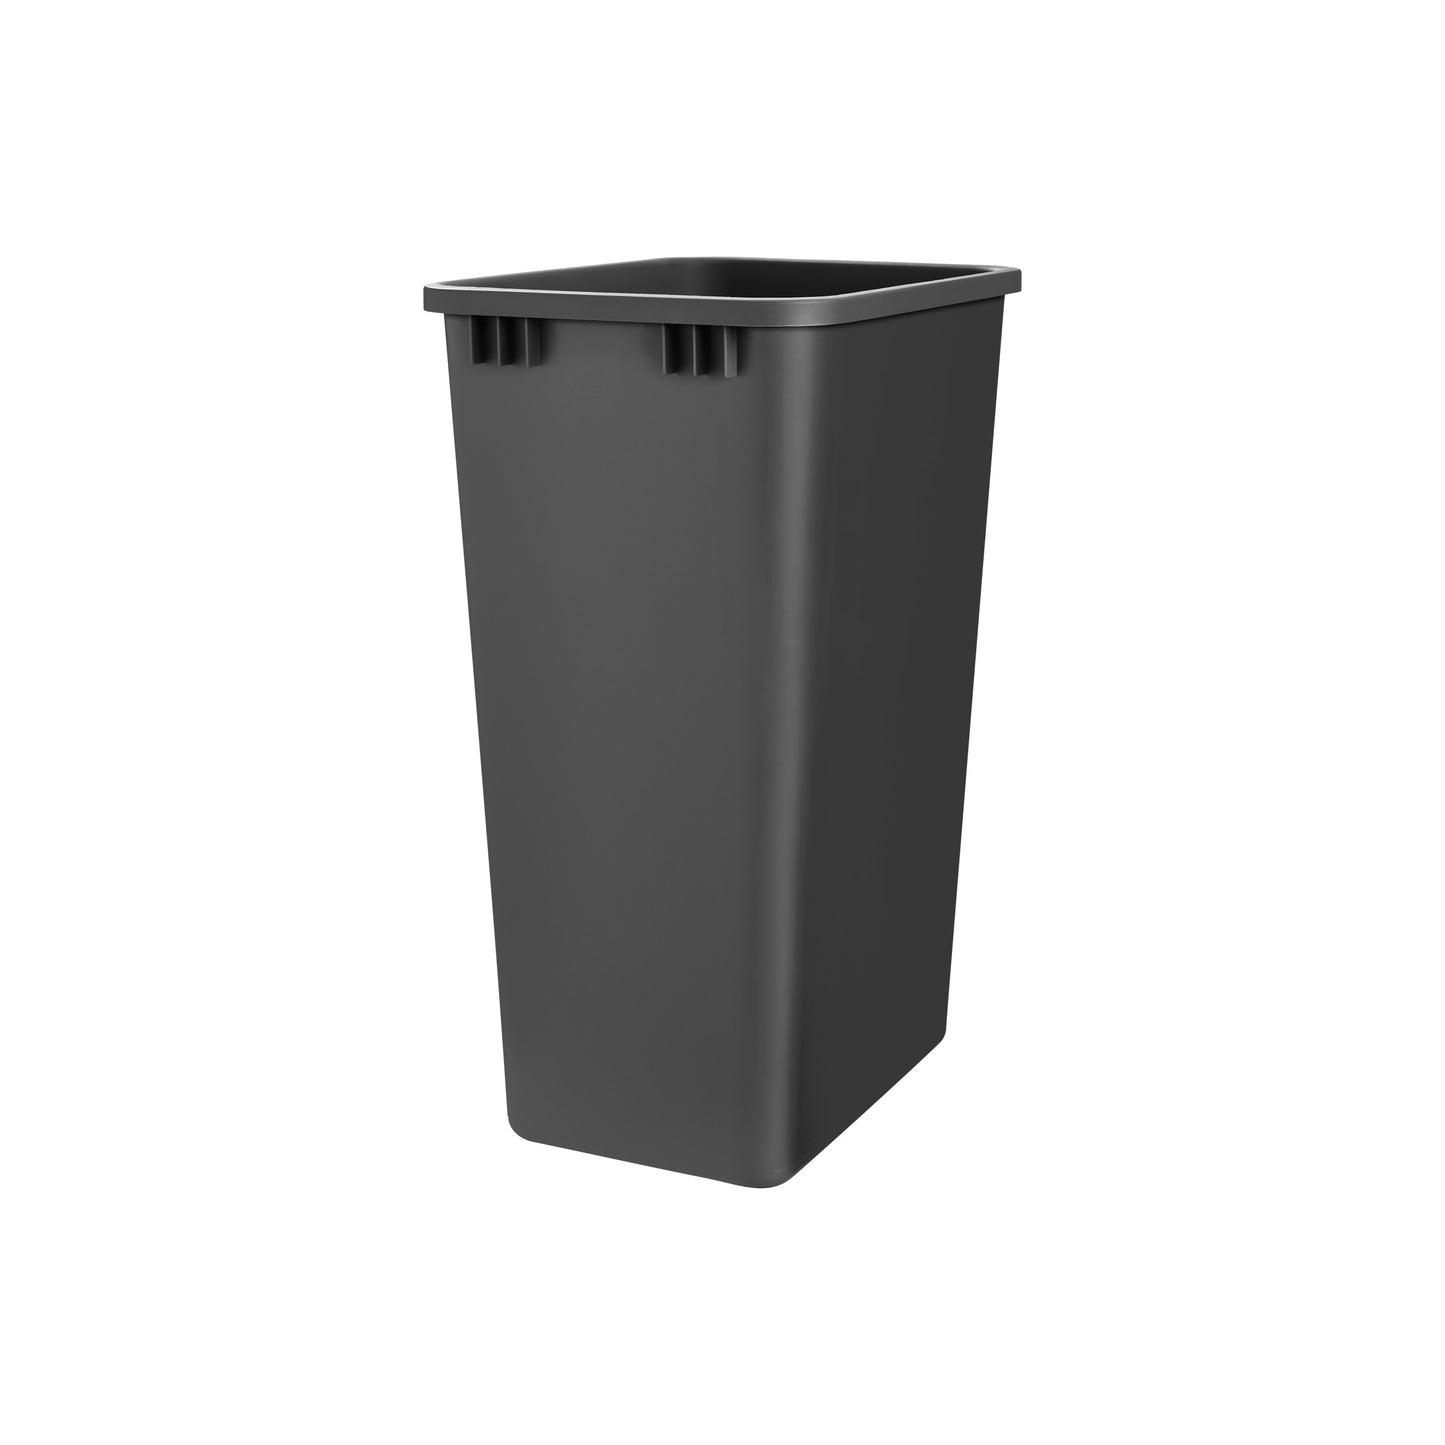 Rev-A-Shelf / RV-50-18-52 / Polymer Replacement 50 qt. Waste/Trash Container for Rev-A-Shelf® Pullouts